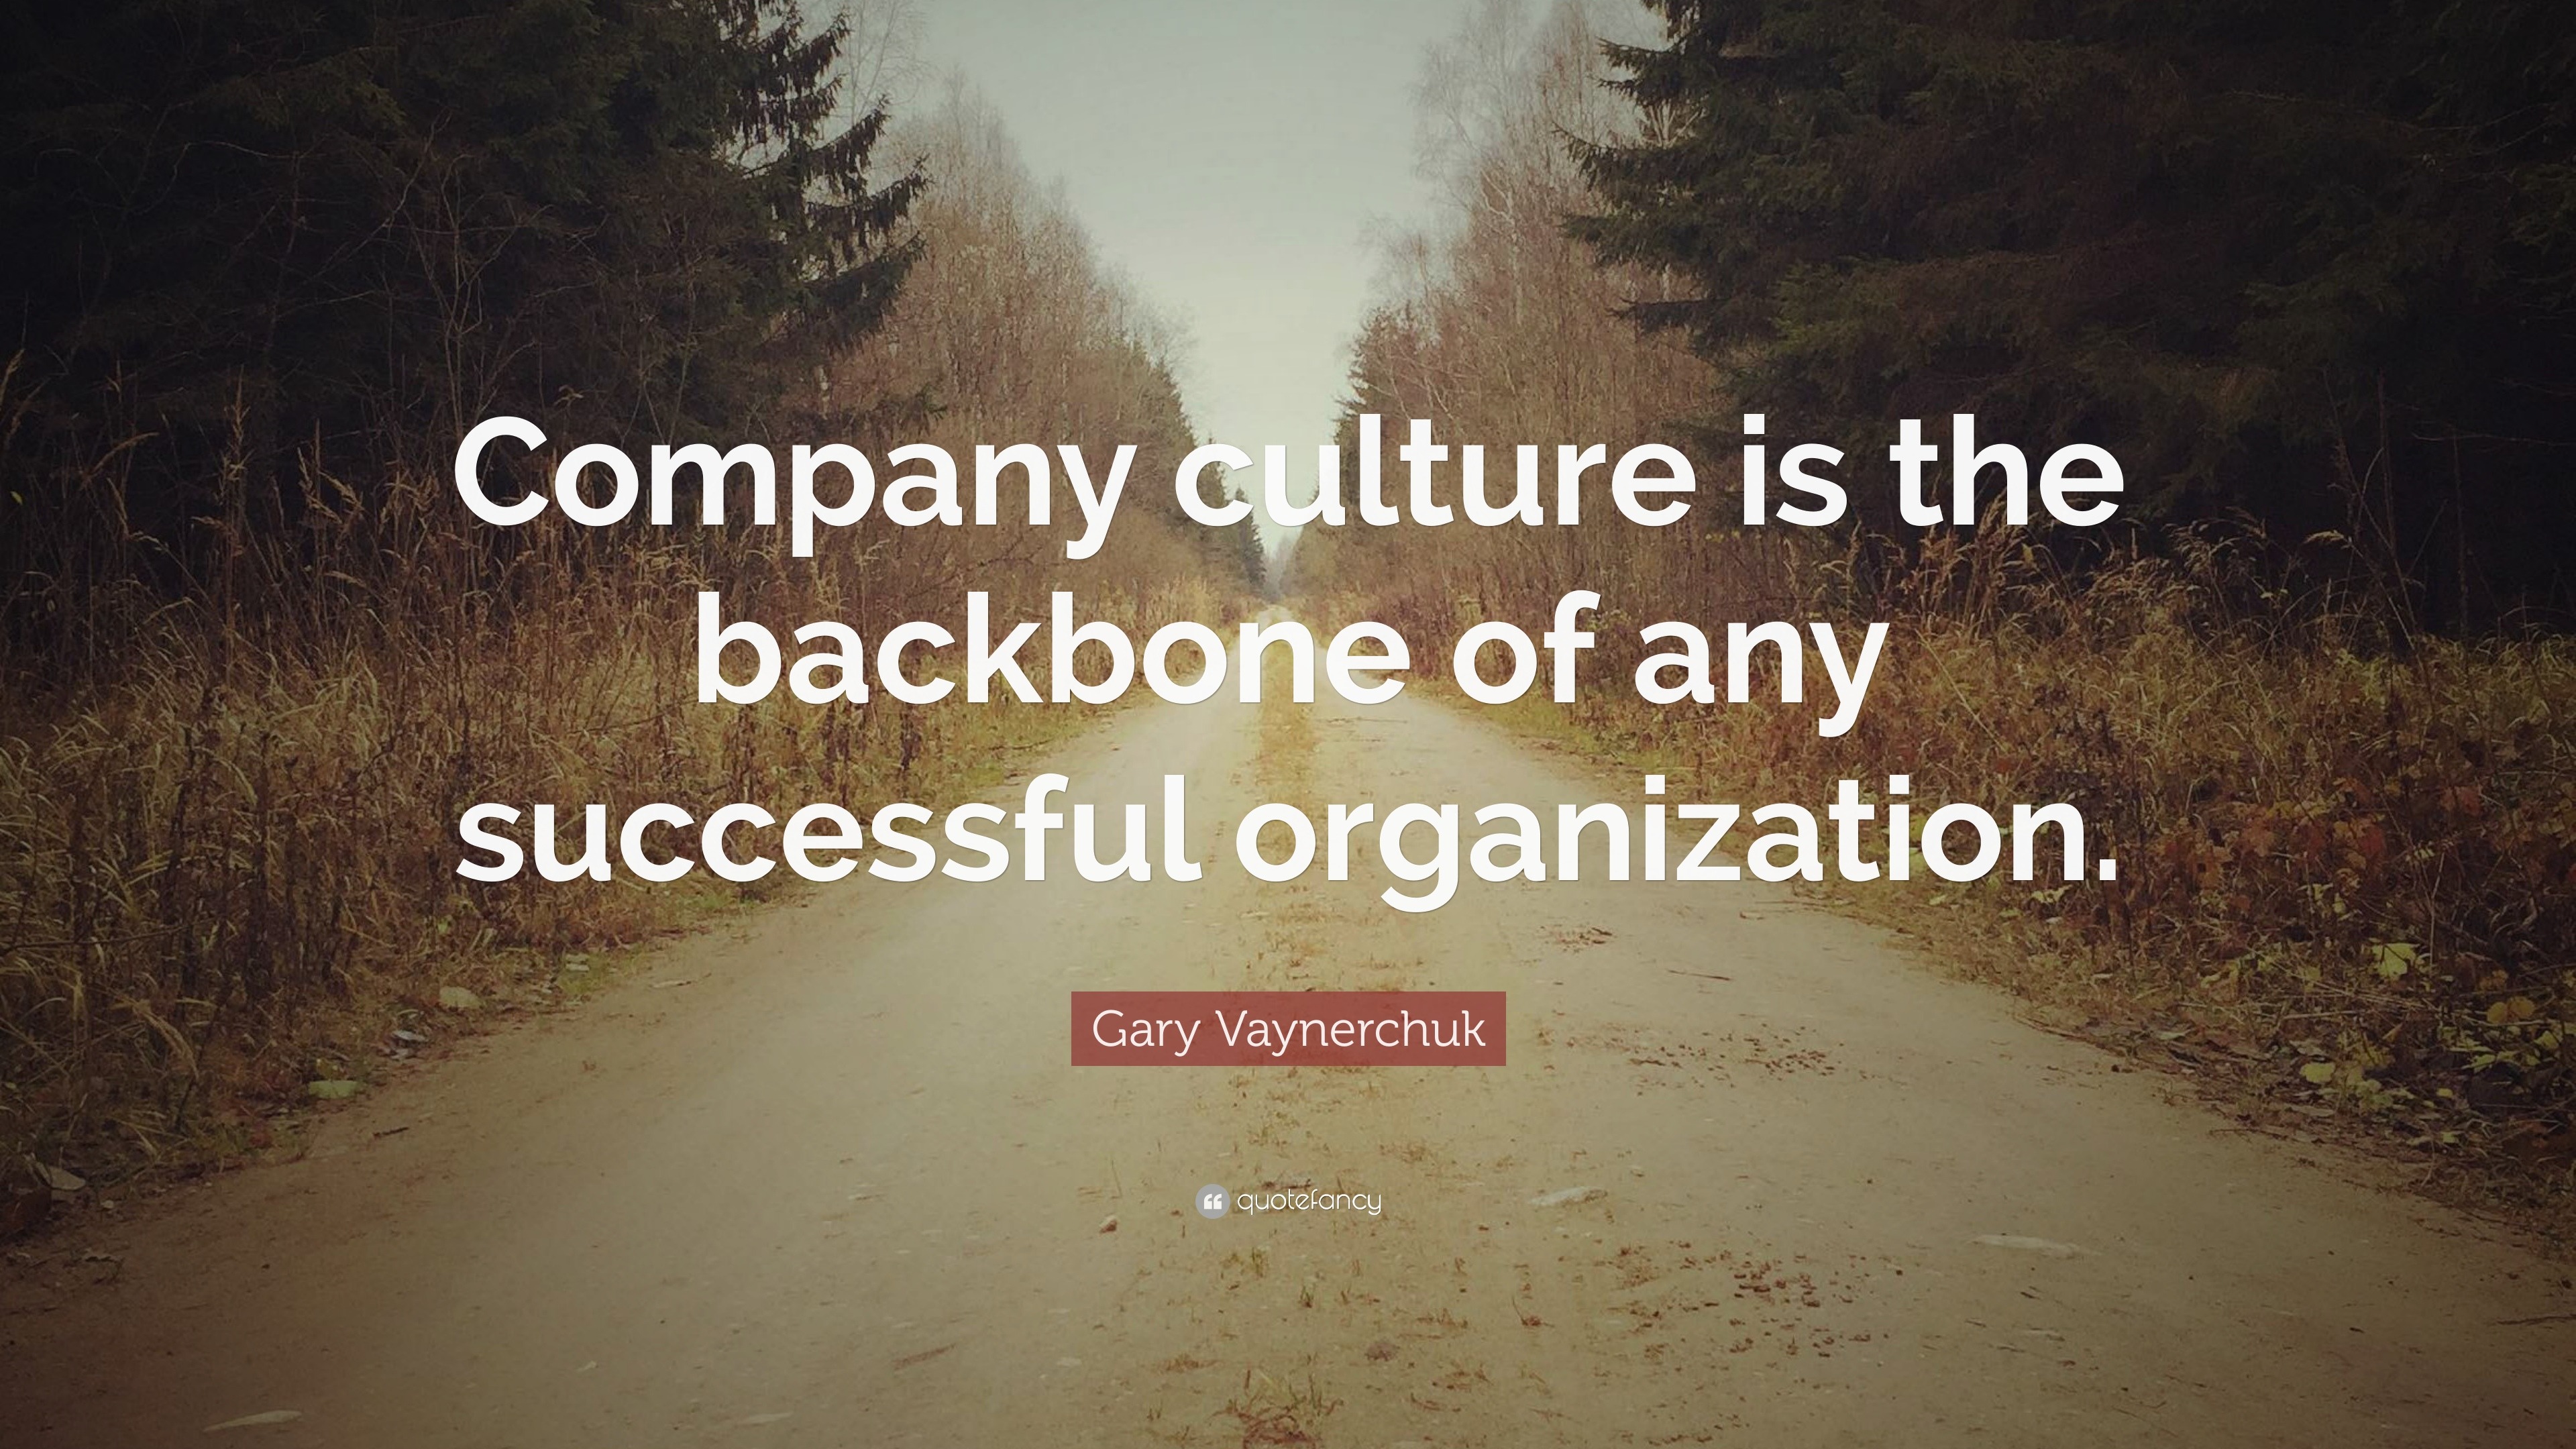 Quotes culture hr company quote inspiring